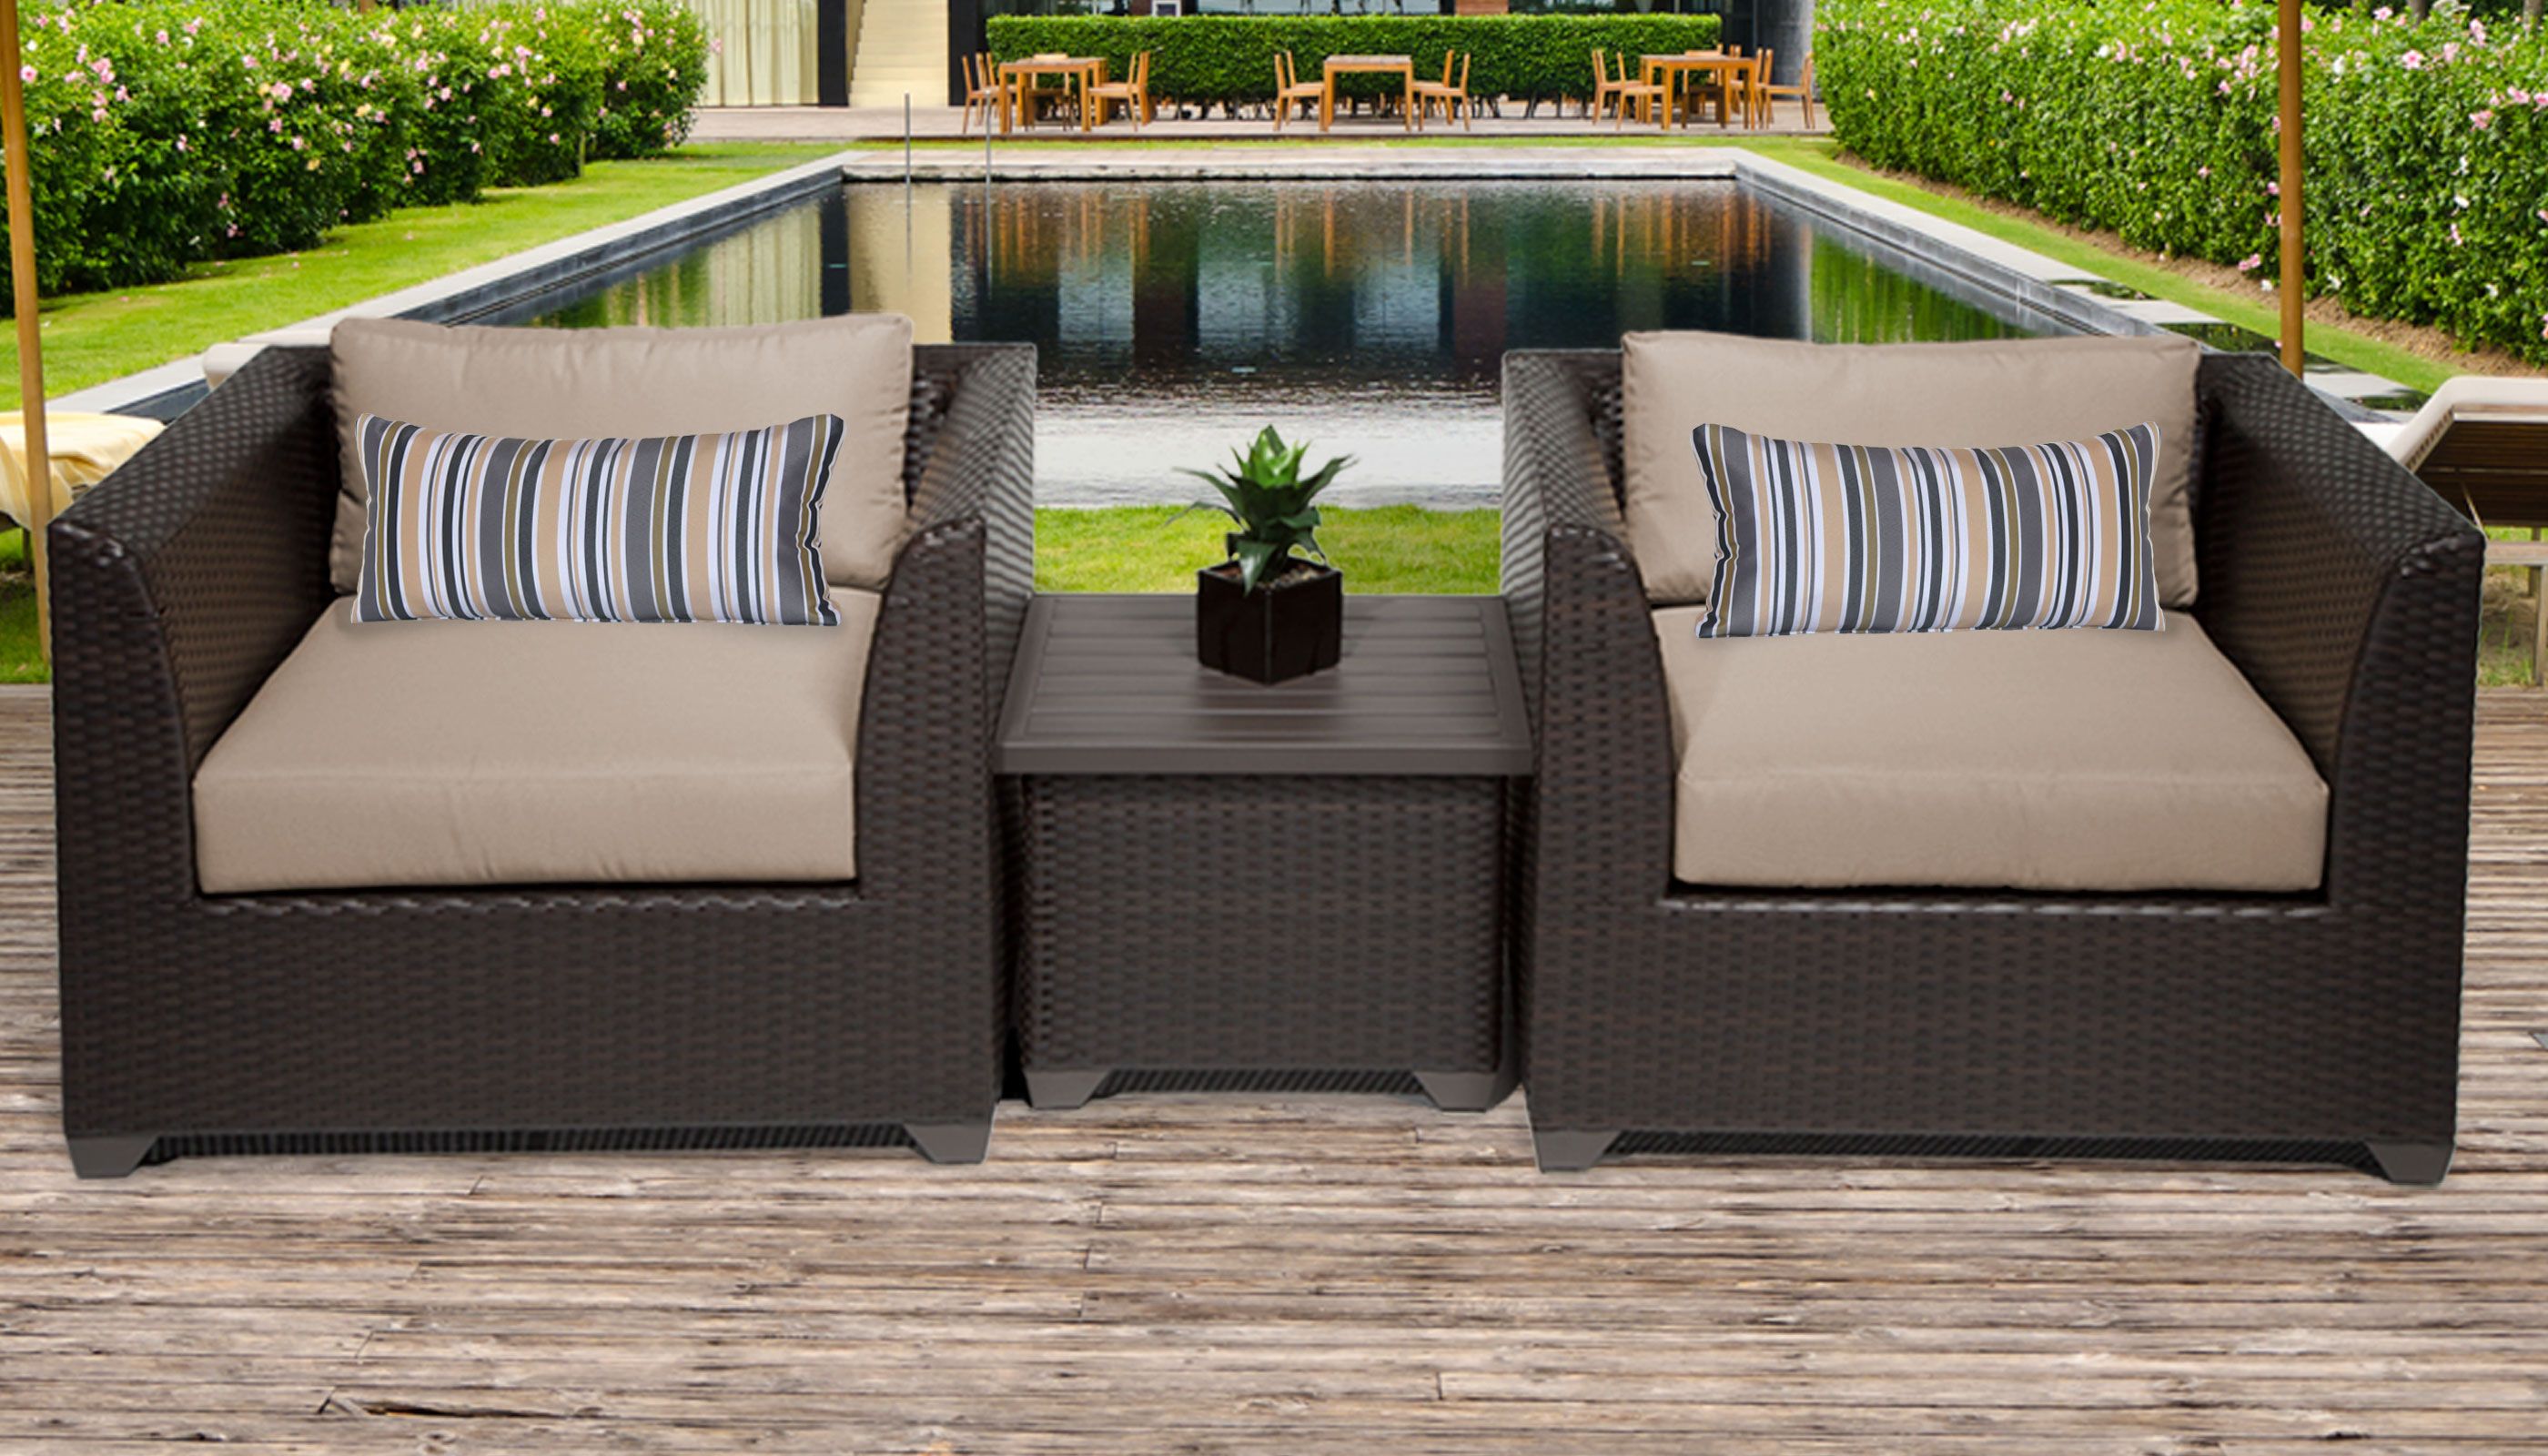 Outdoor Wicker 3 Piece Set Pertaining To Recent Barbados 3 Piece Outdoor Wicker Patio Furniture Set 03a (Photo 5 of 15)